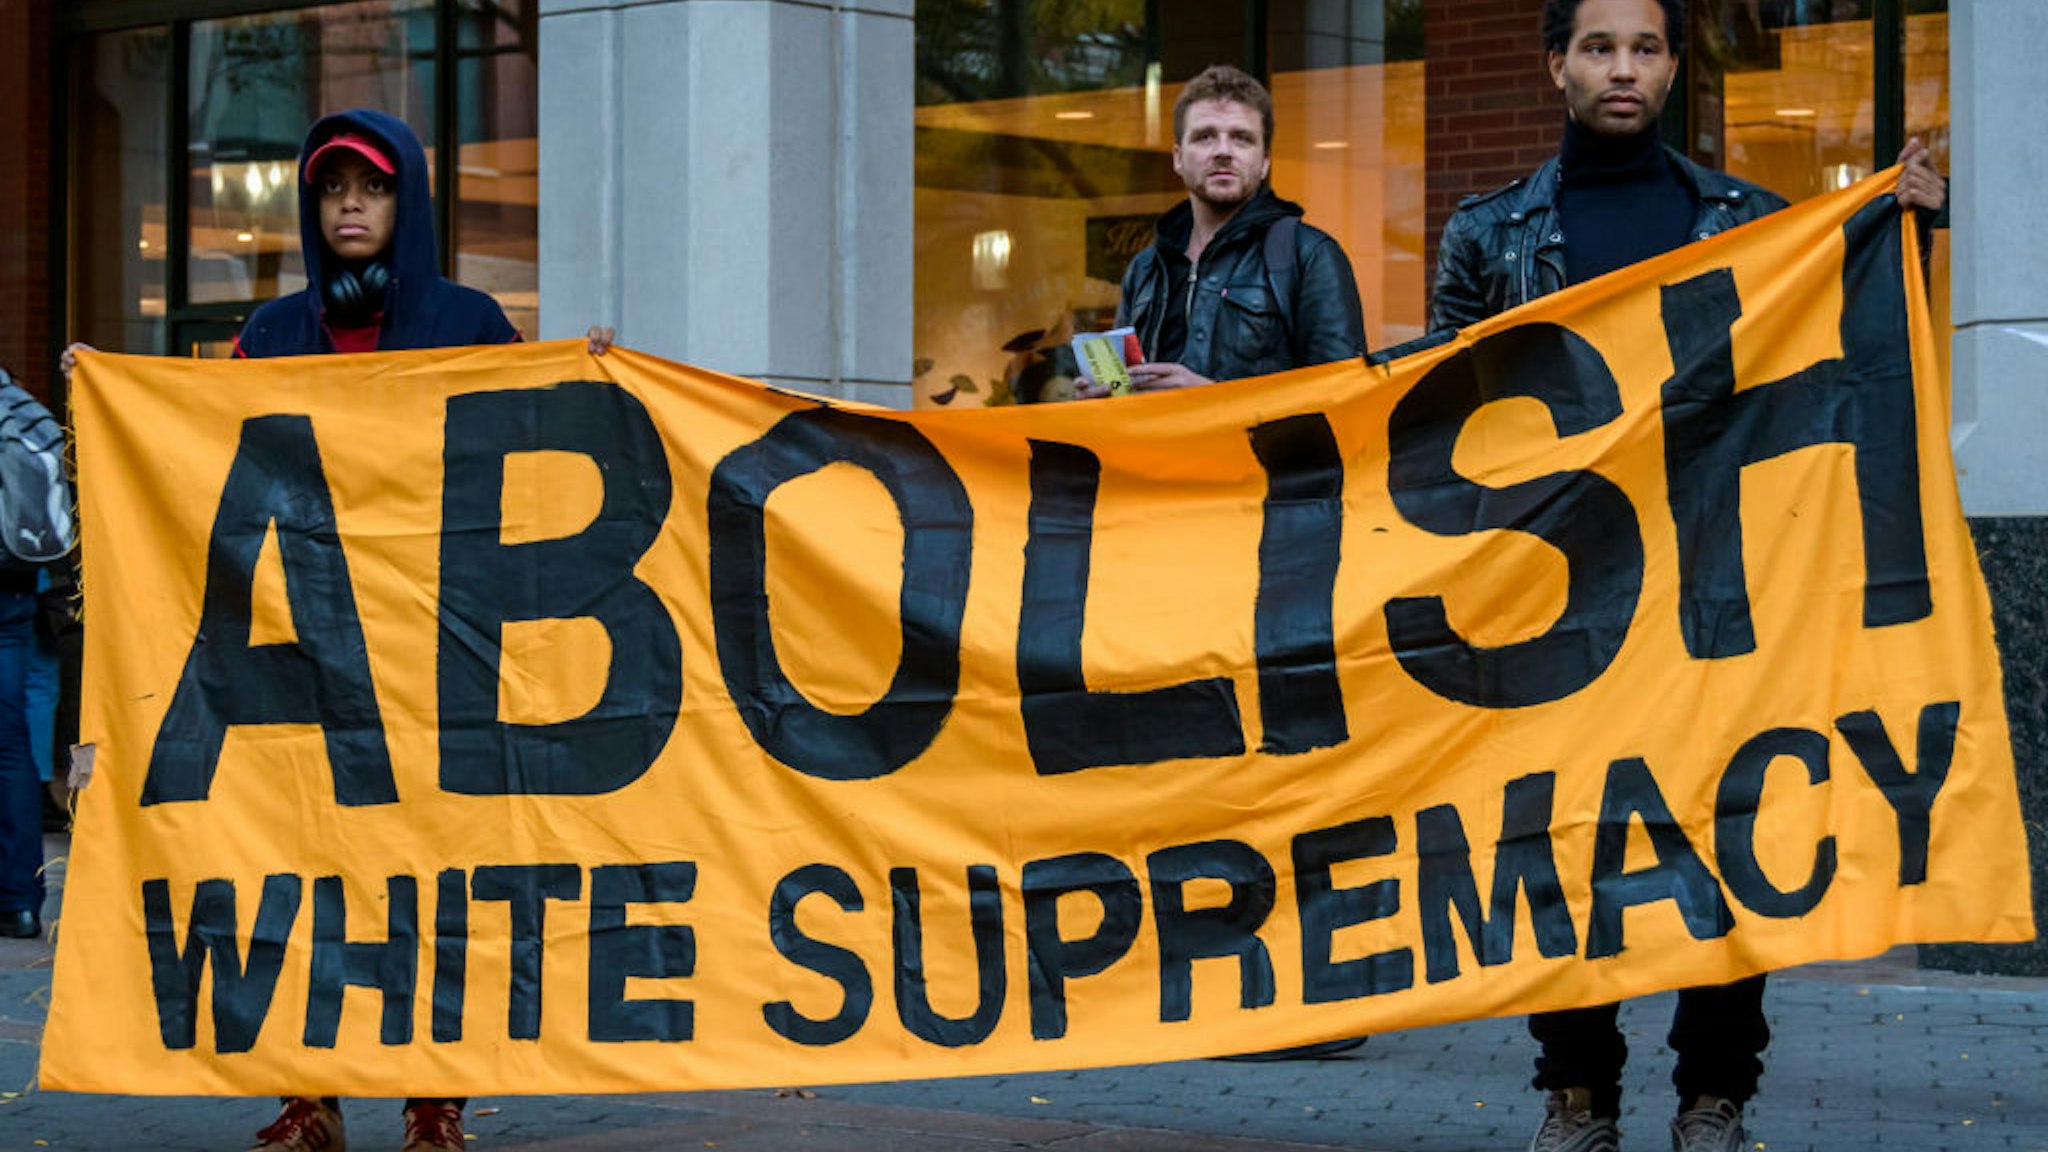 Protesters holding an ABOLISH WHITE SUPREMACY banner at the rally in Metrotech Plaza.